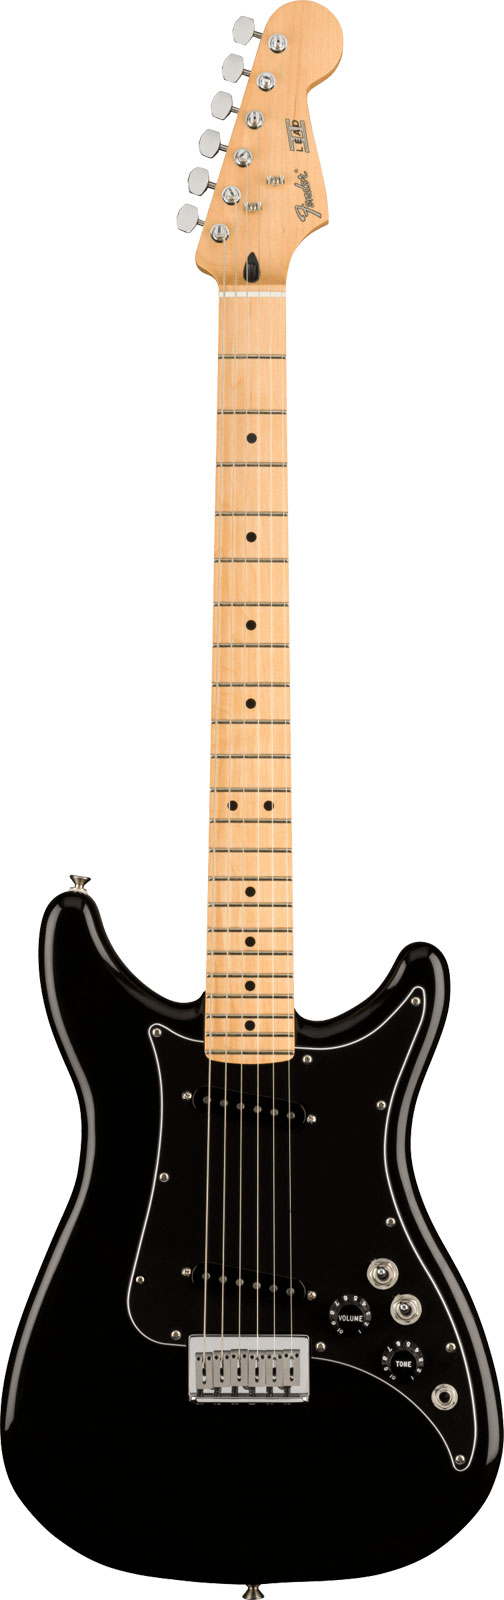 FENDER MEXICAN PLAYER LEAD II MN, BLACK